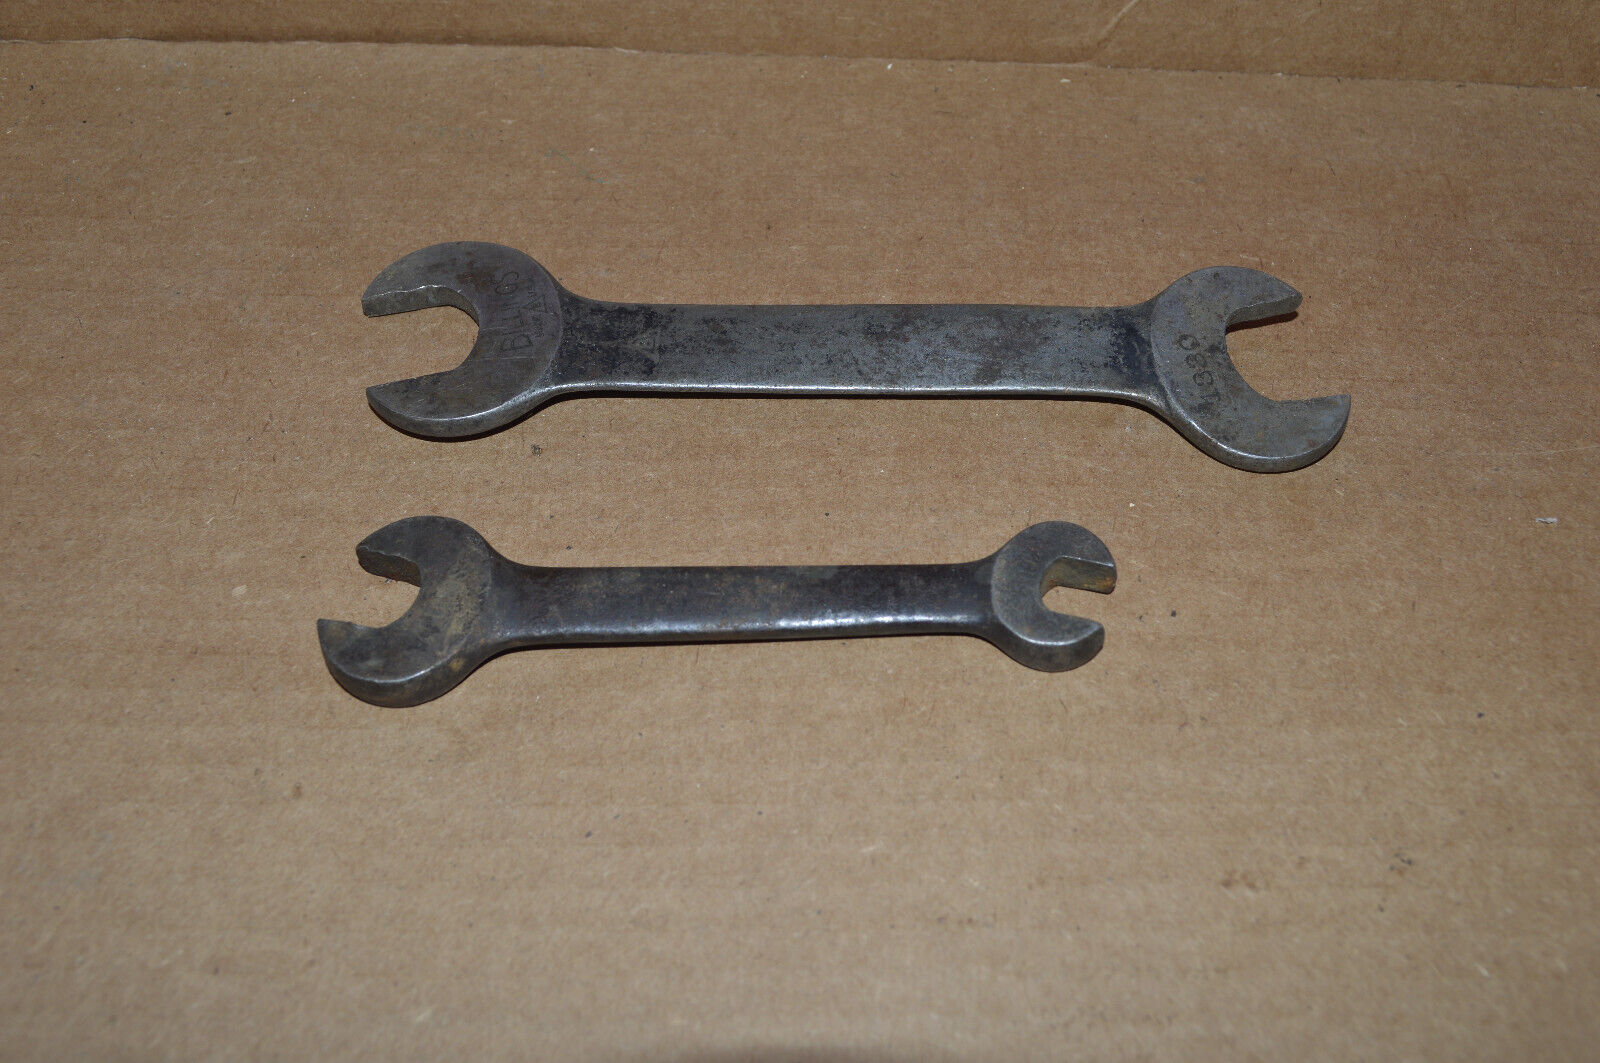 Vintage Billings Open End Wrenches